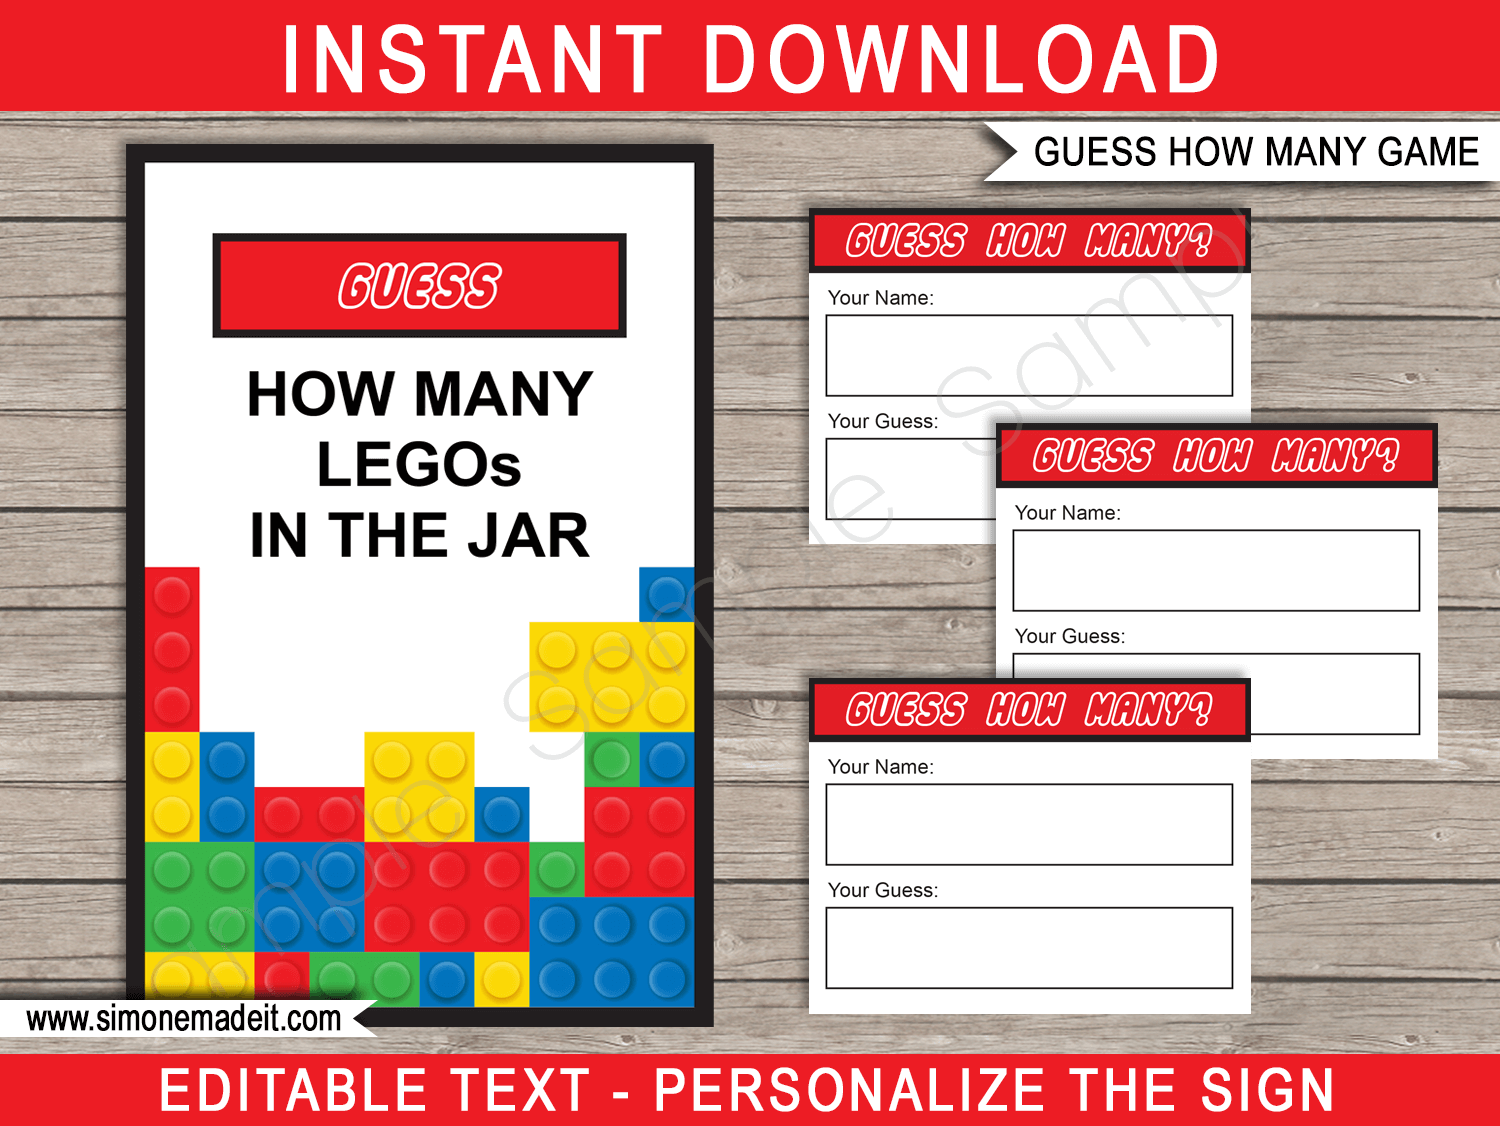 Printable Guess How Many Lego Party Game Template | Birthday Party Games | DIY Editable Text |  $3.00 INSTANT DOWNLOAD via simonemadeit.com